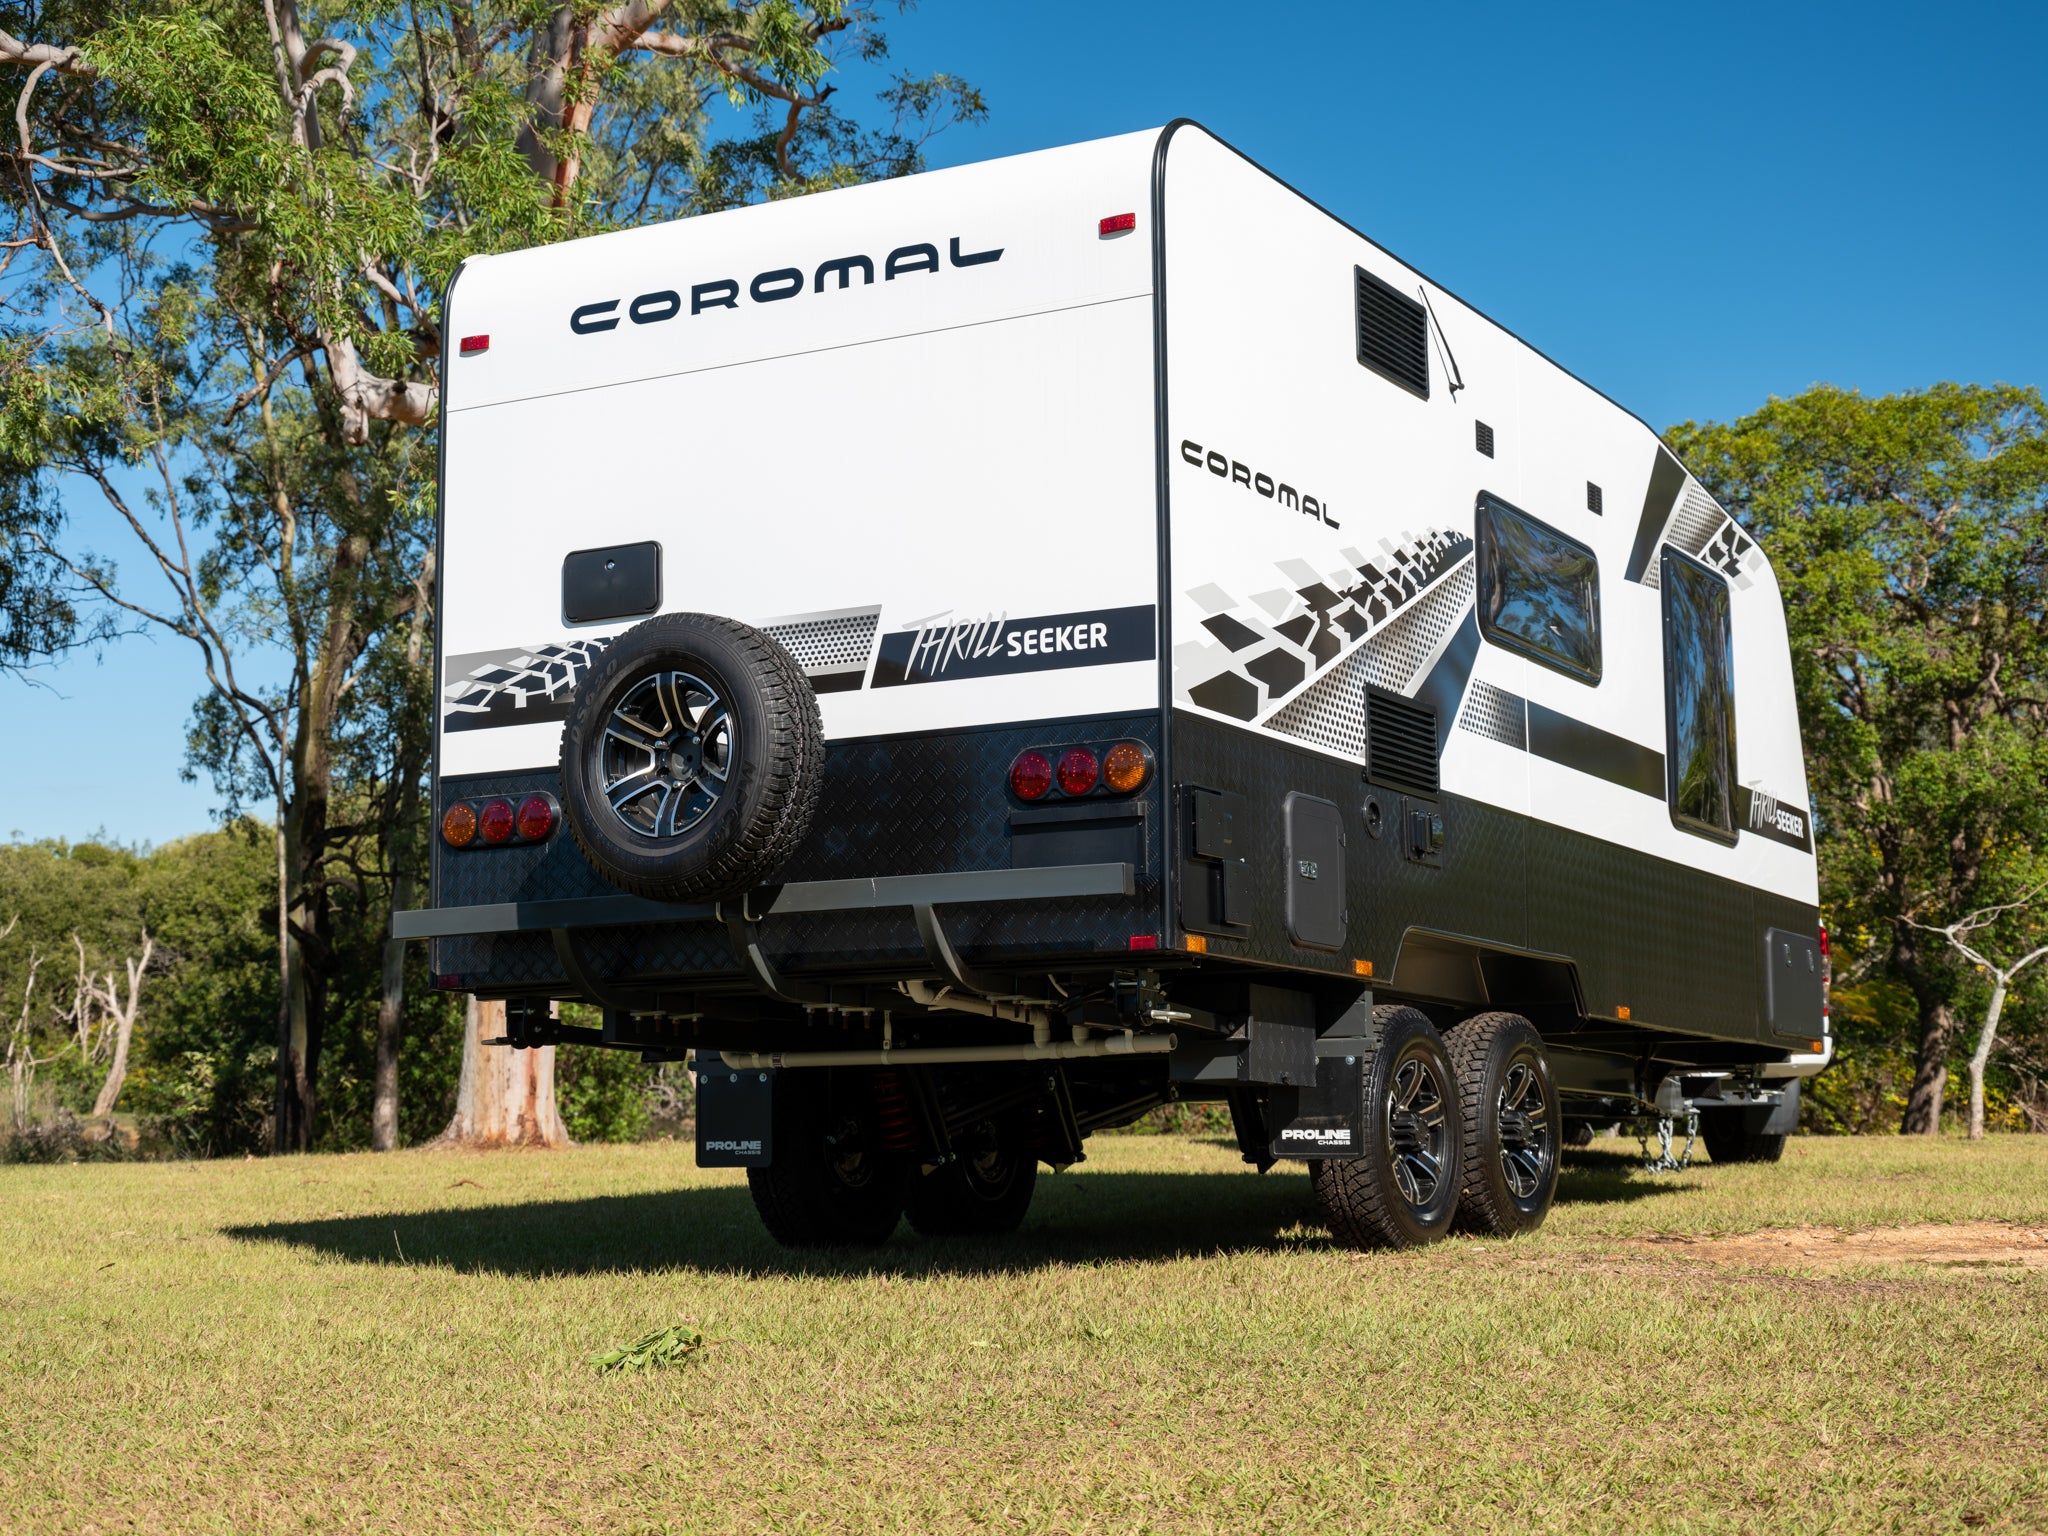 Coromal Thrill Seeker 18.6 Couples Rear angle view exterior